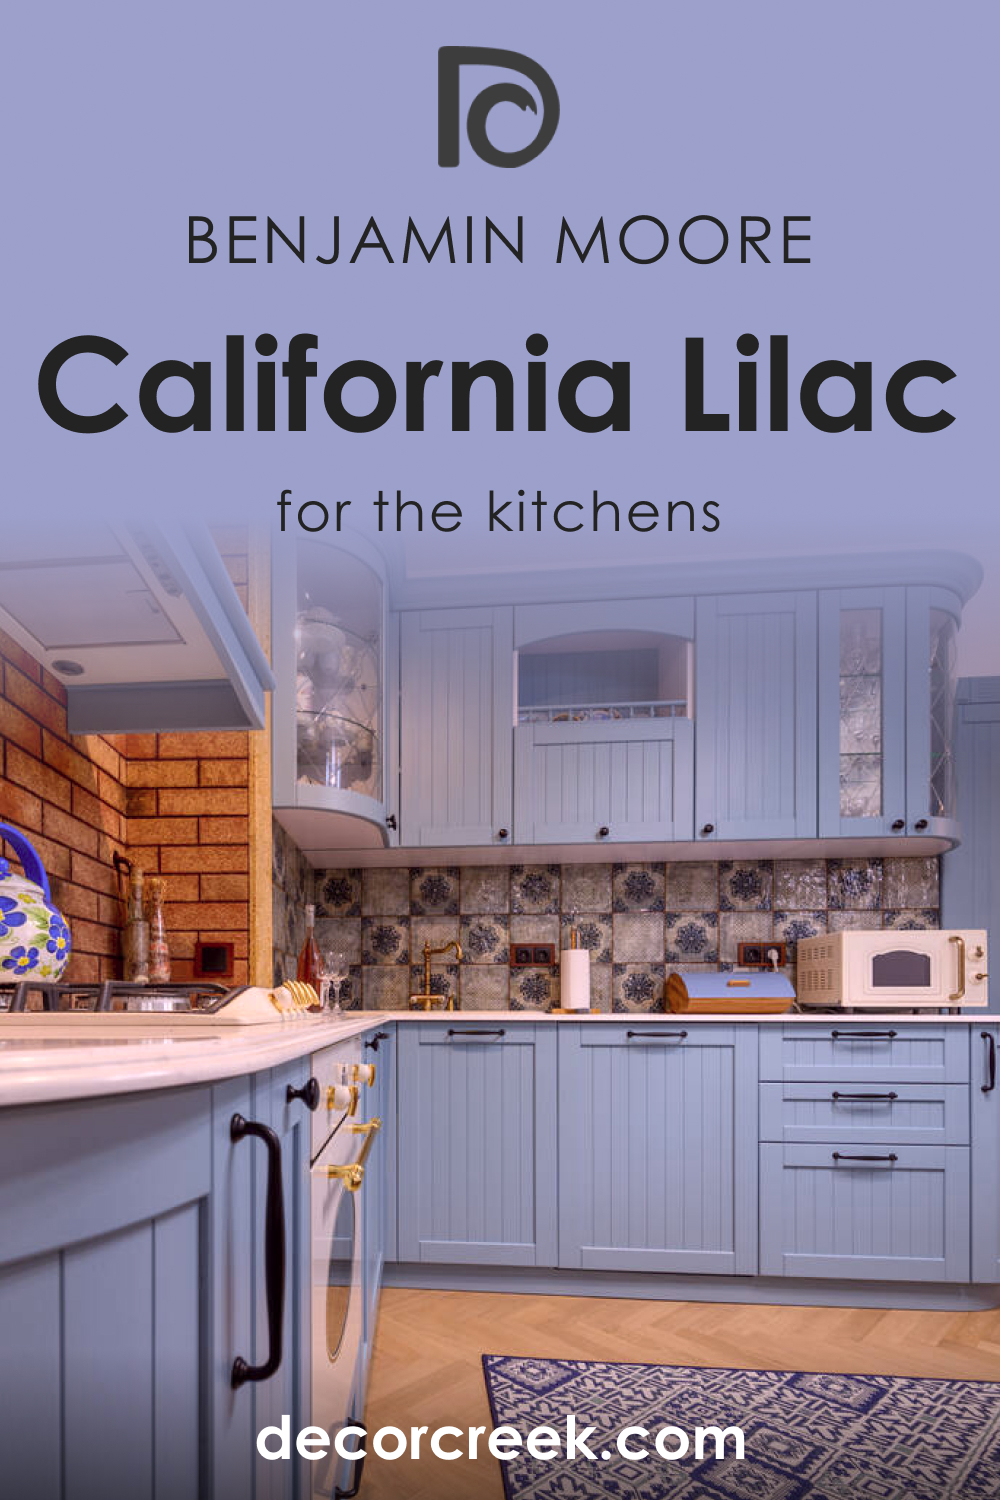 How to Use California Lilac 2068-40 in the Kitchen?